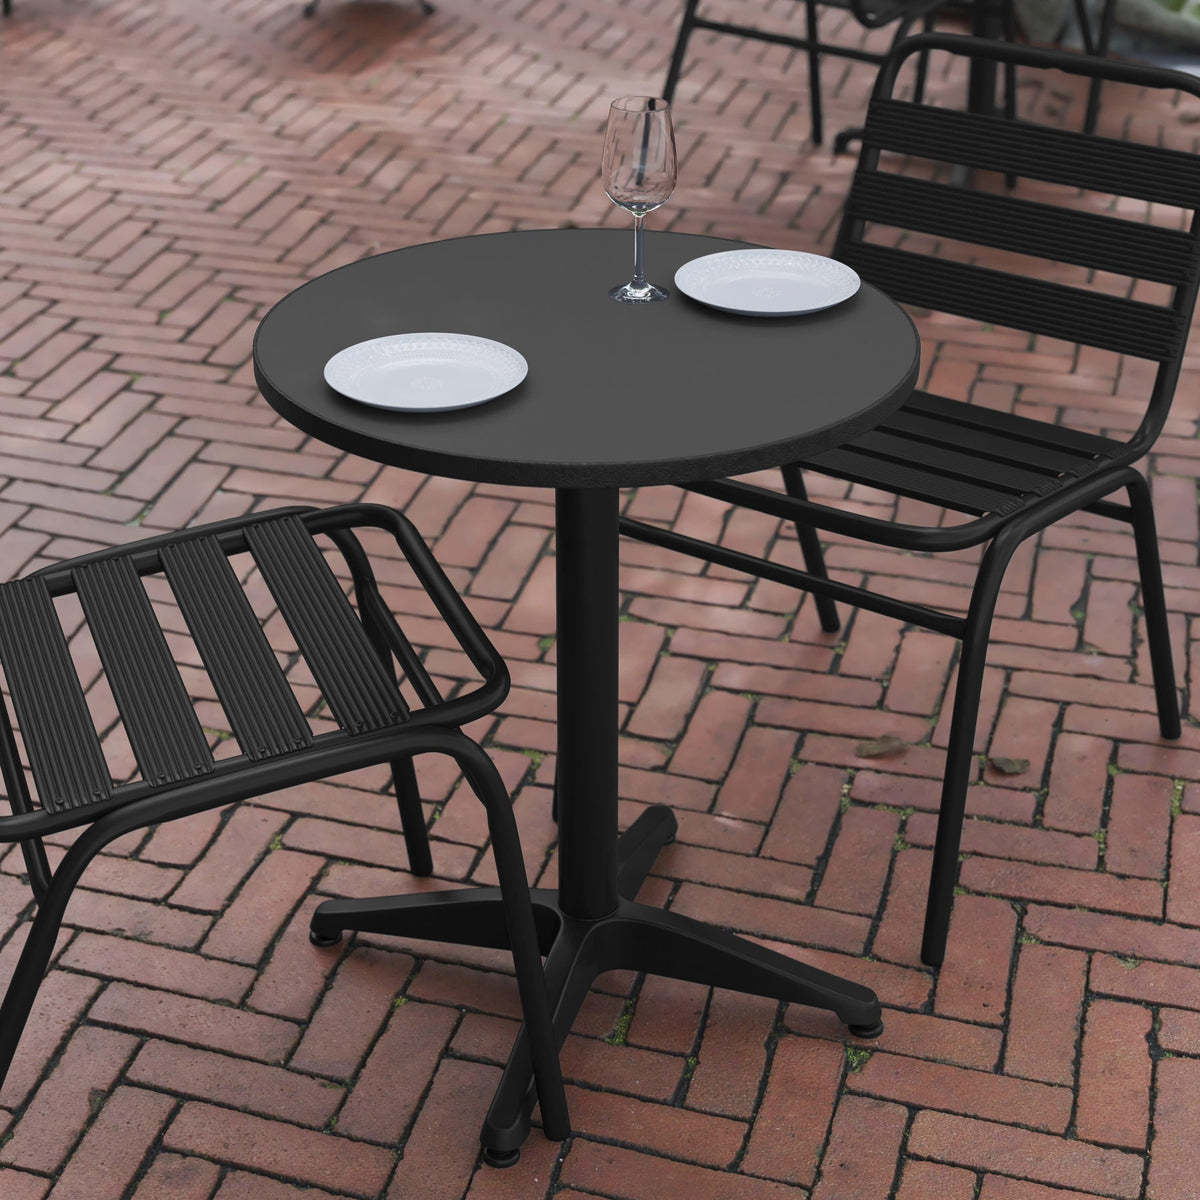 Black |#| 23.5inch Round Metal Smooth Top Indoor-Outdoor Table with Base - Black